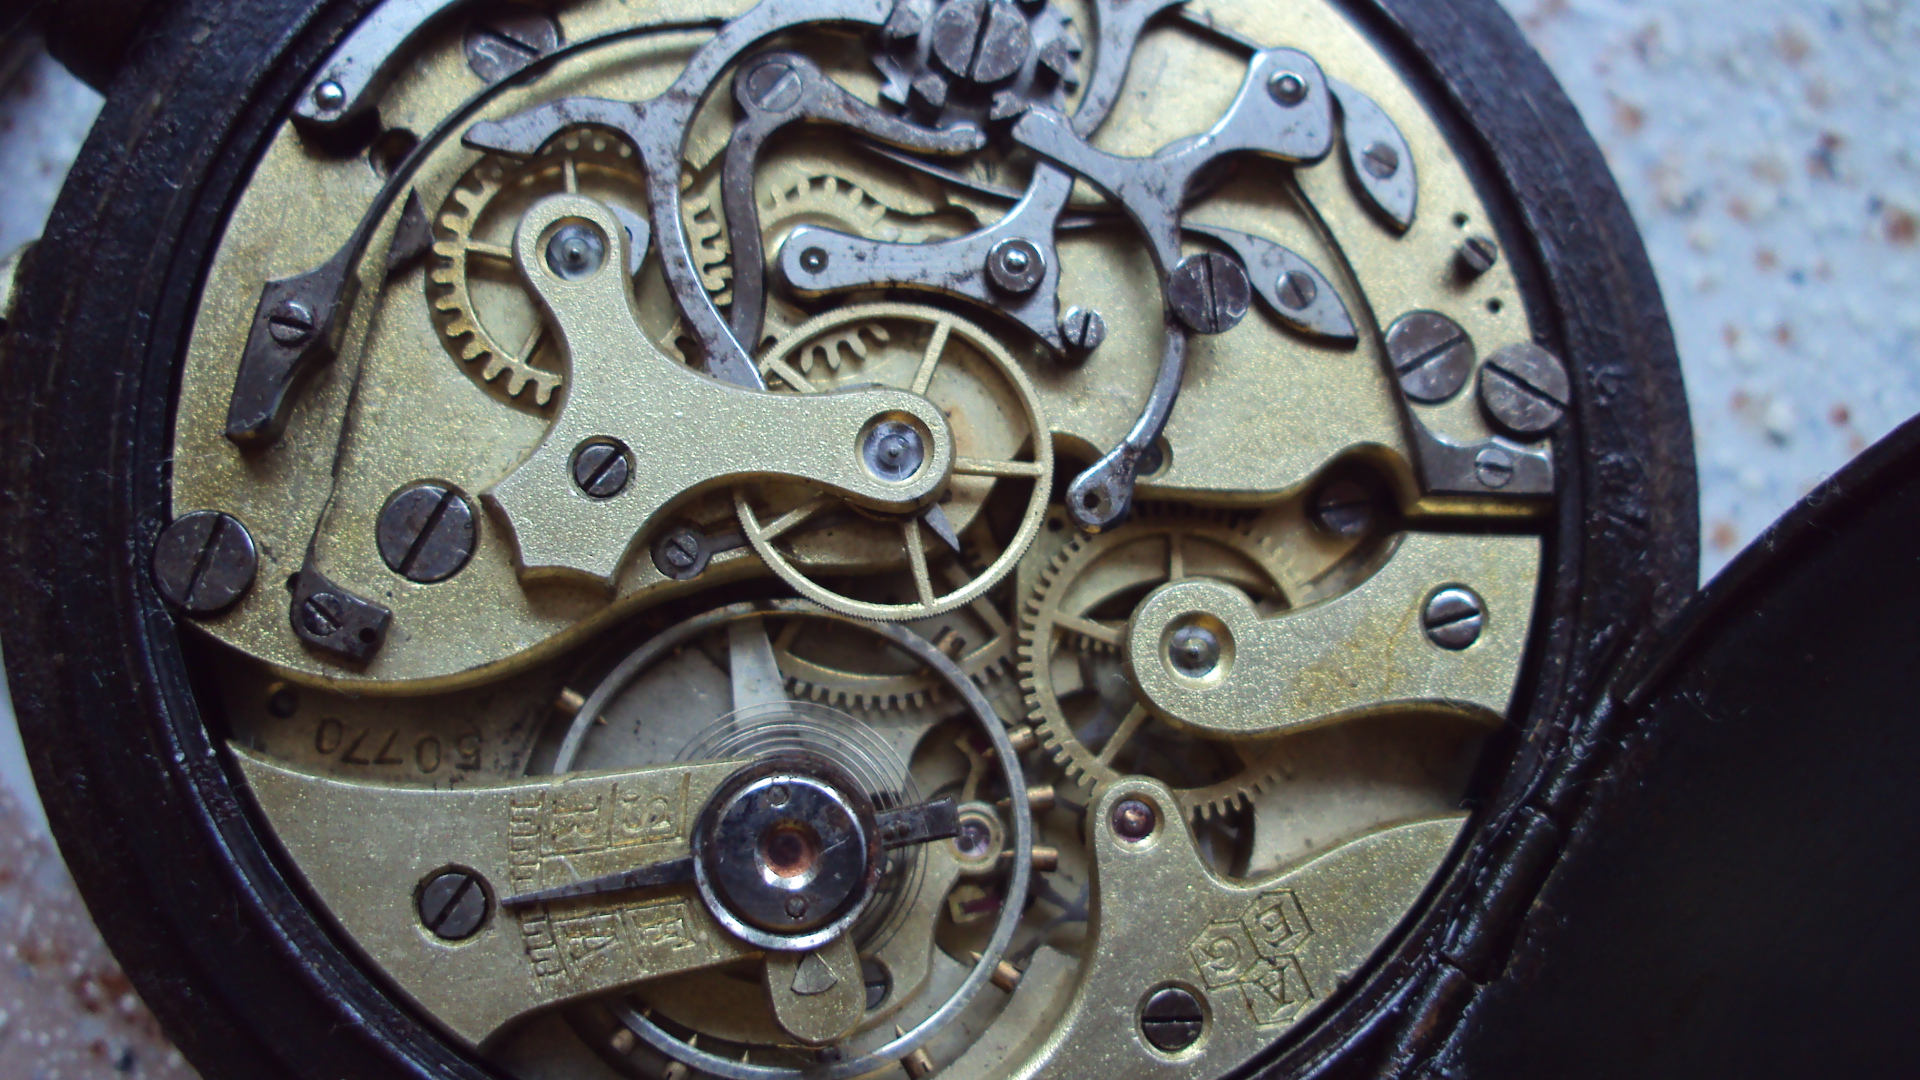 Free download Mechanical Gears Wallpaper Hd Of Time Pictures